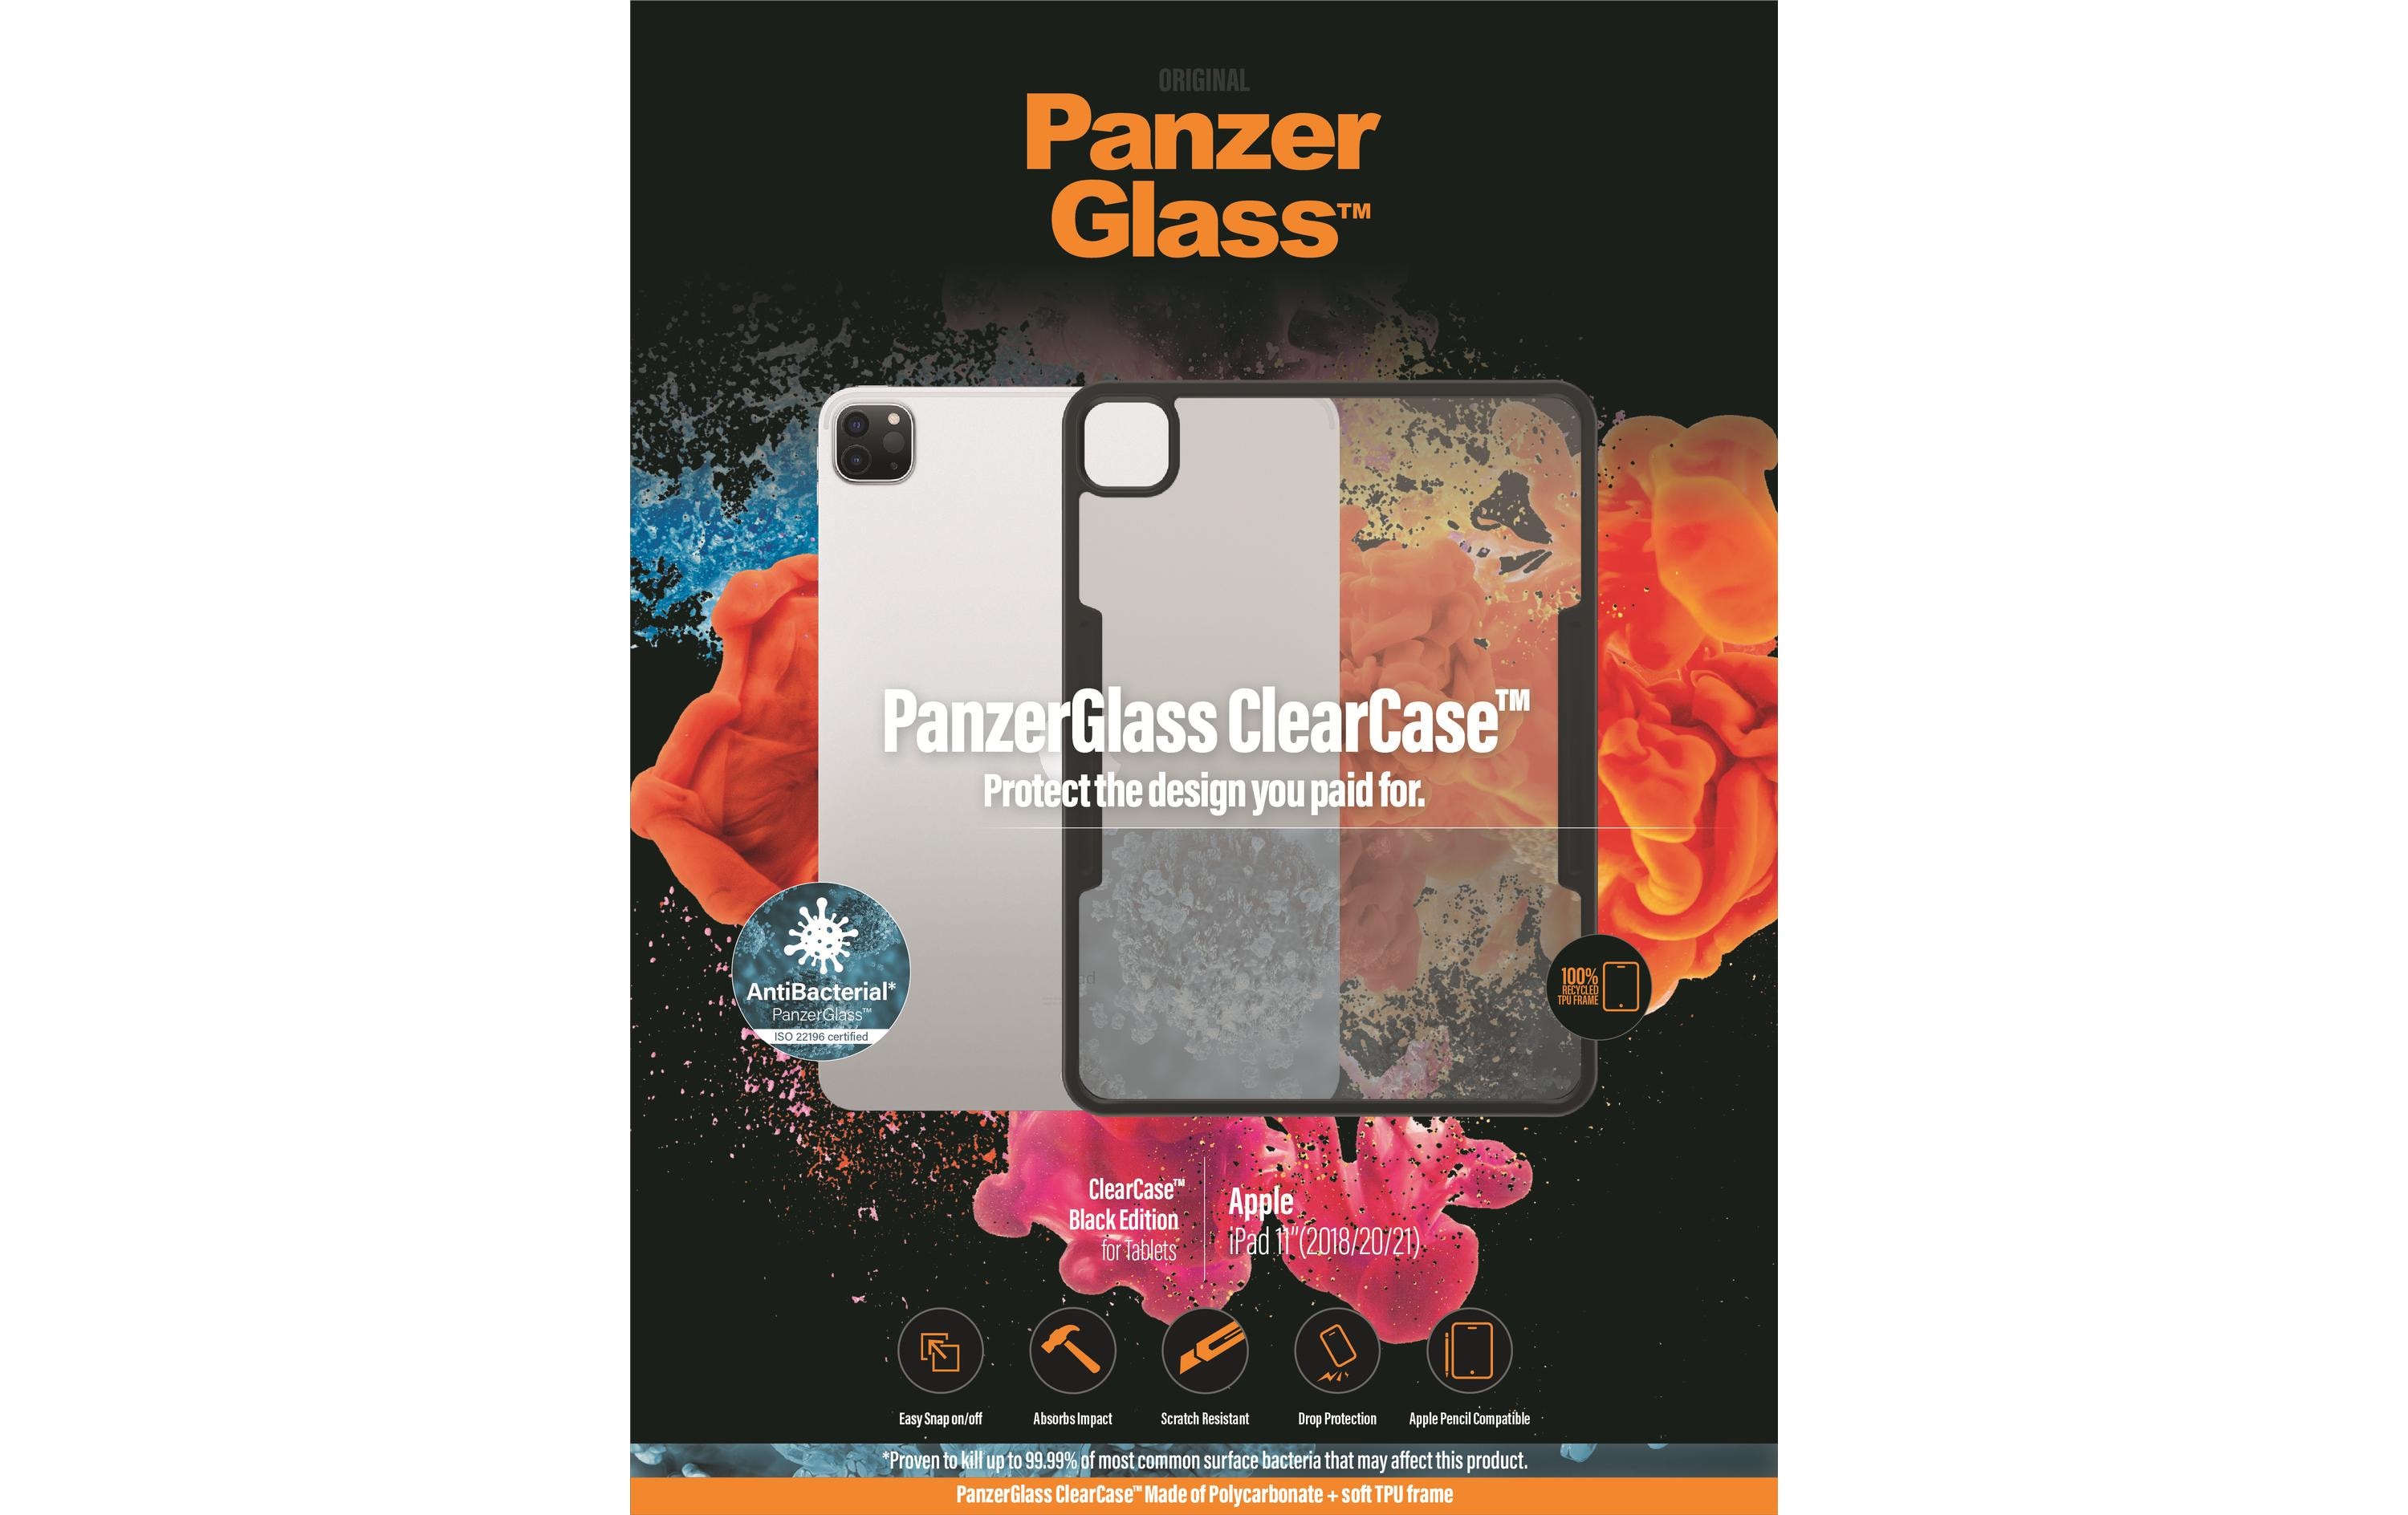 Panzerglass Back Cover ClearCase Black Edition AB iPad Pro 11 (1-3 Gen.)